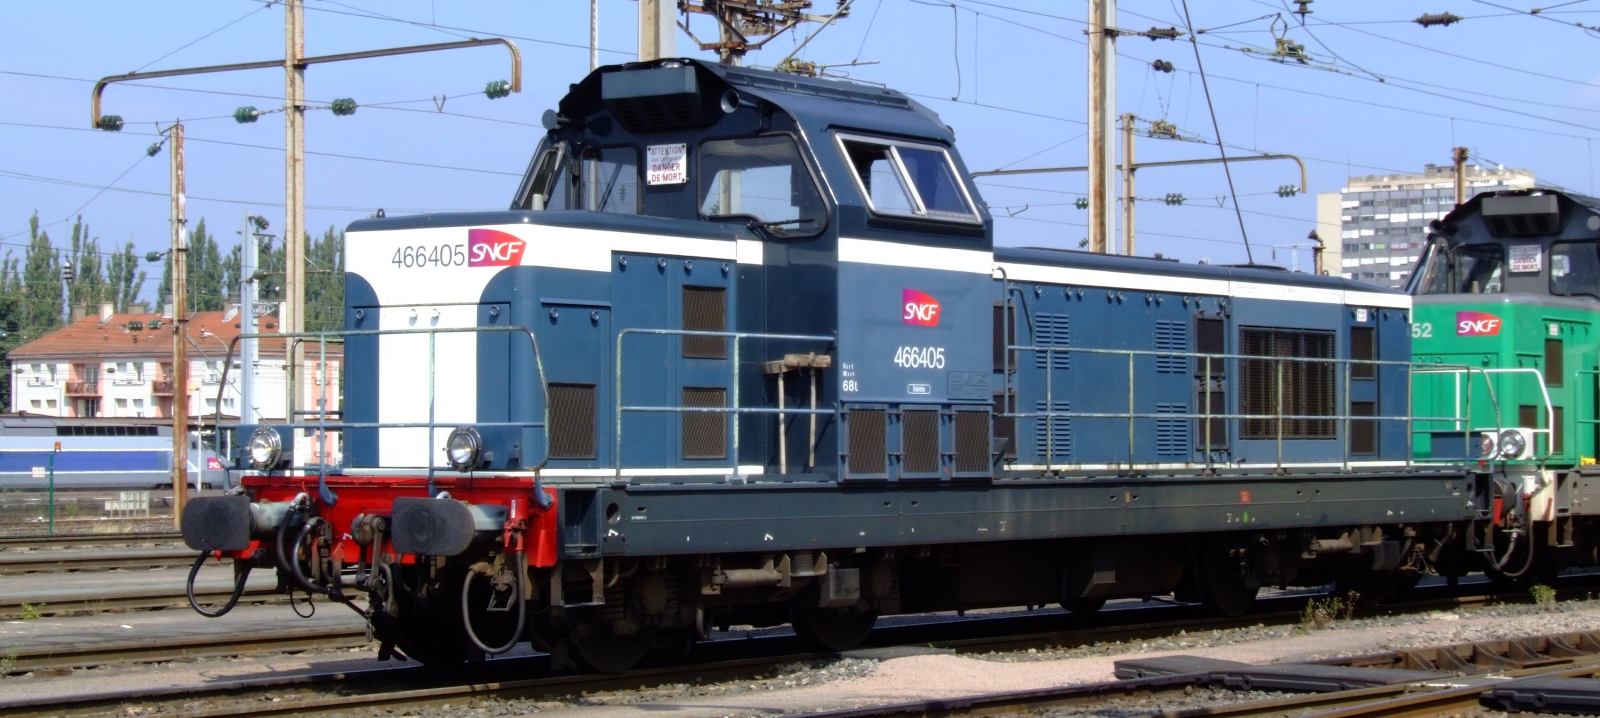 BB 466405 in 2008 in Thionville